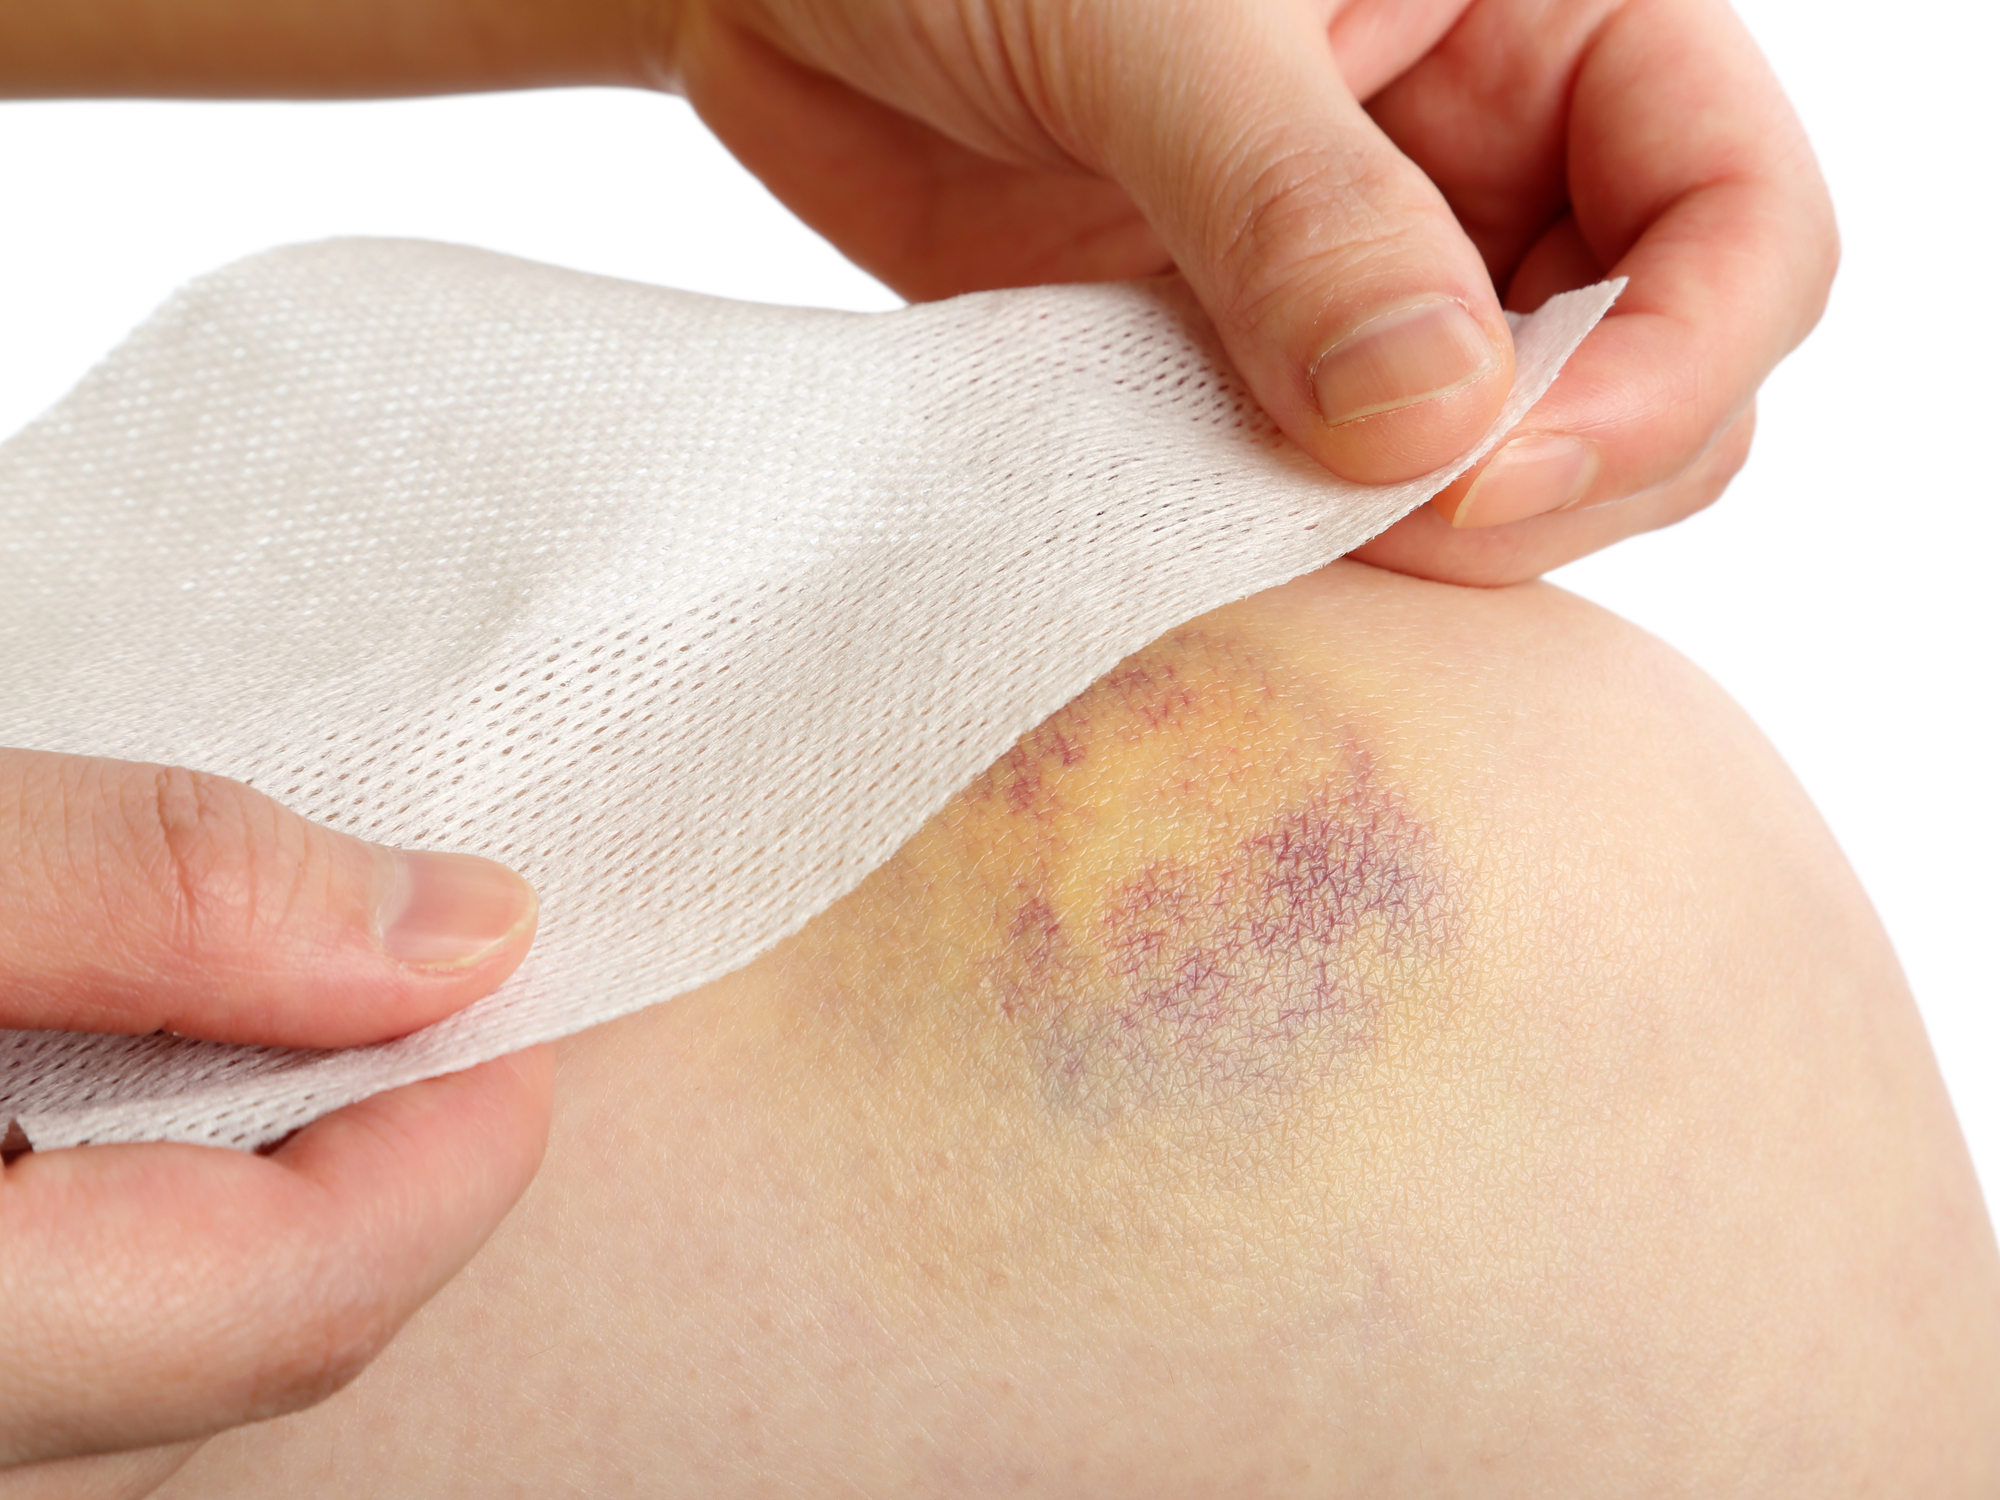 3 supplements that stop unsightly bruising